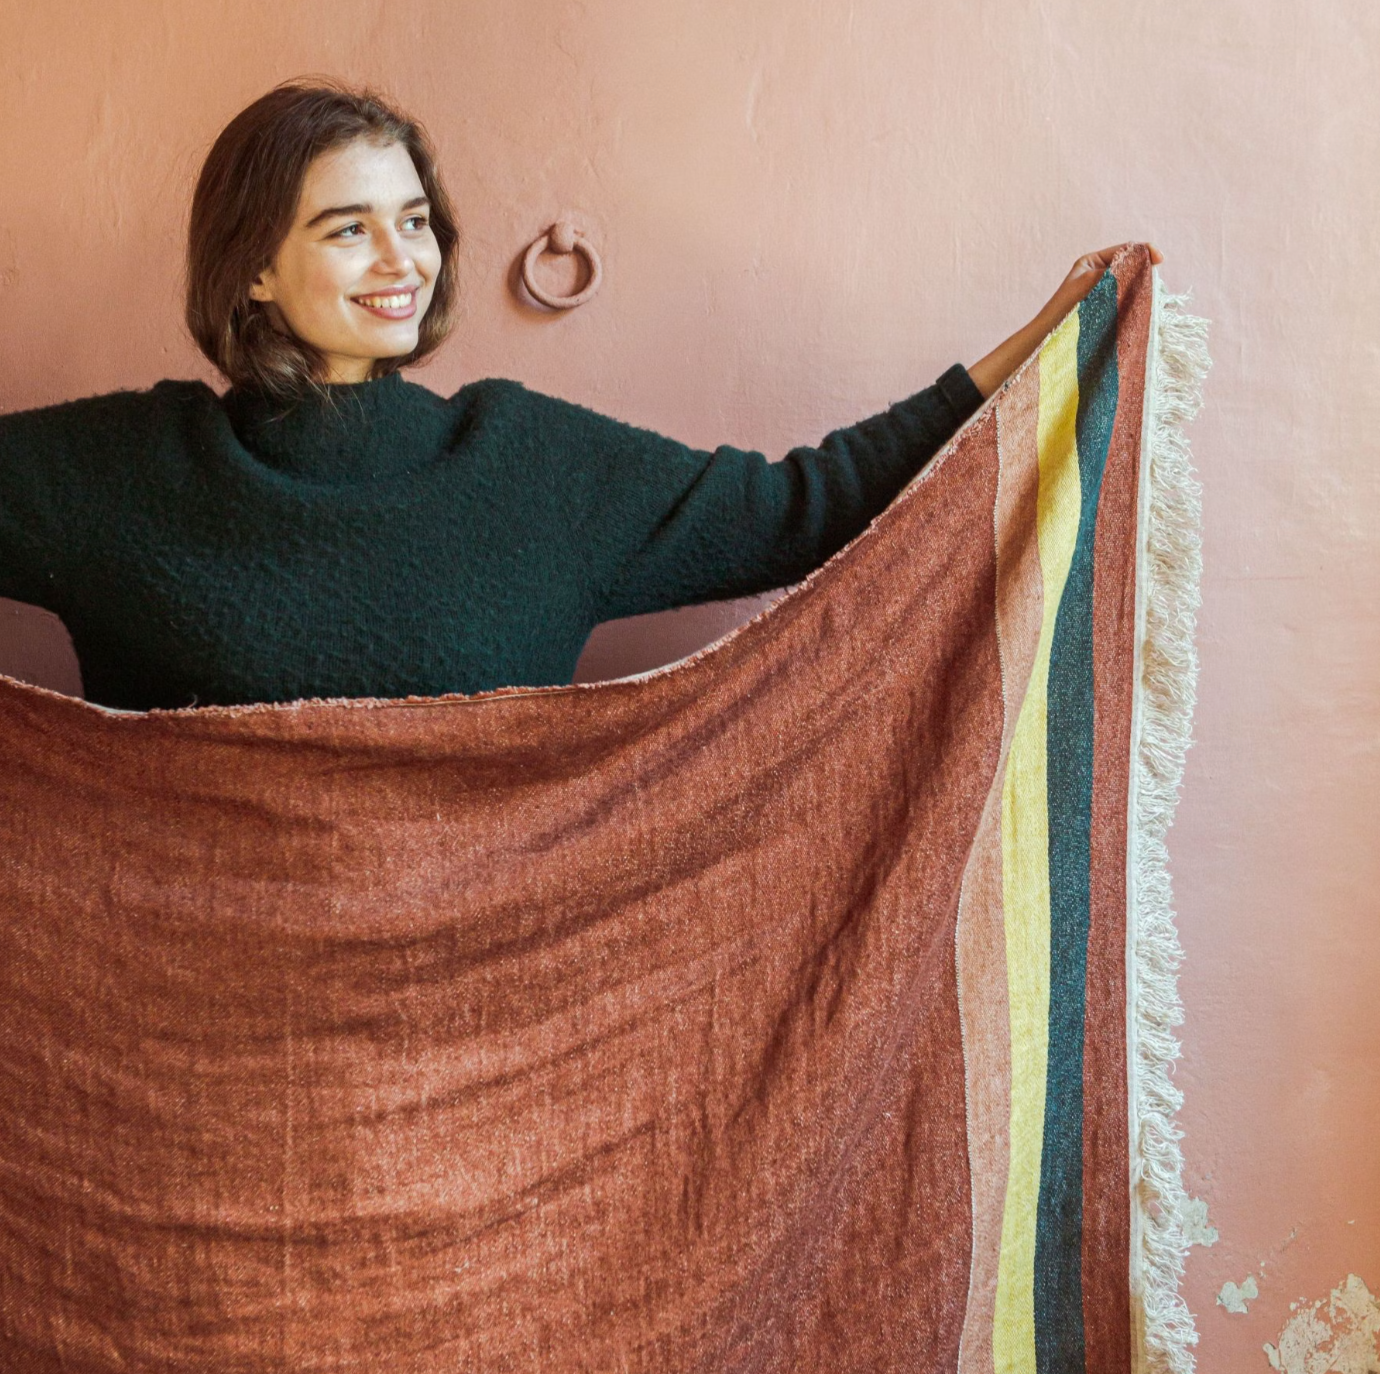 woman holding a Belgian linen towel to show color and design